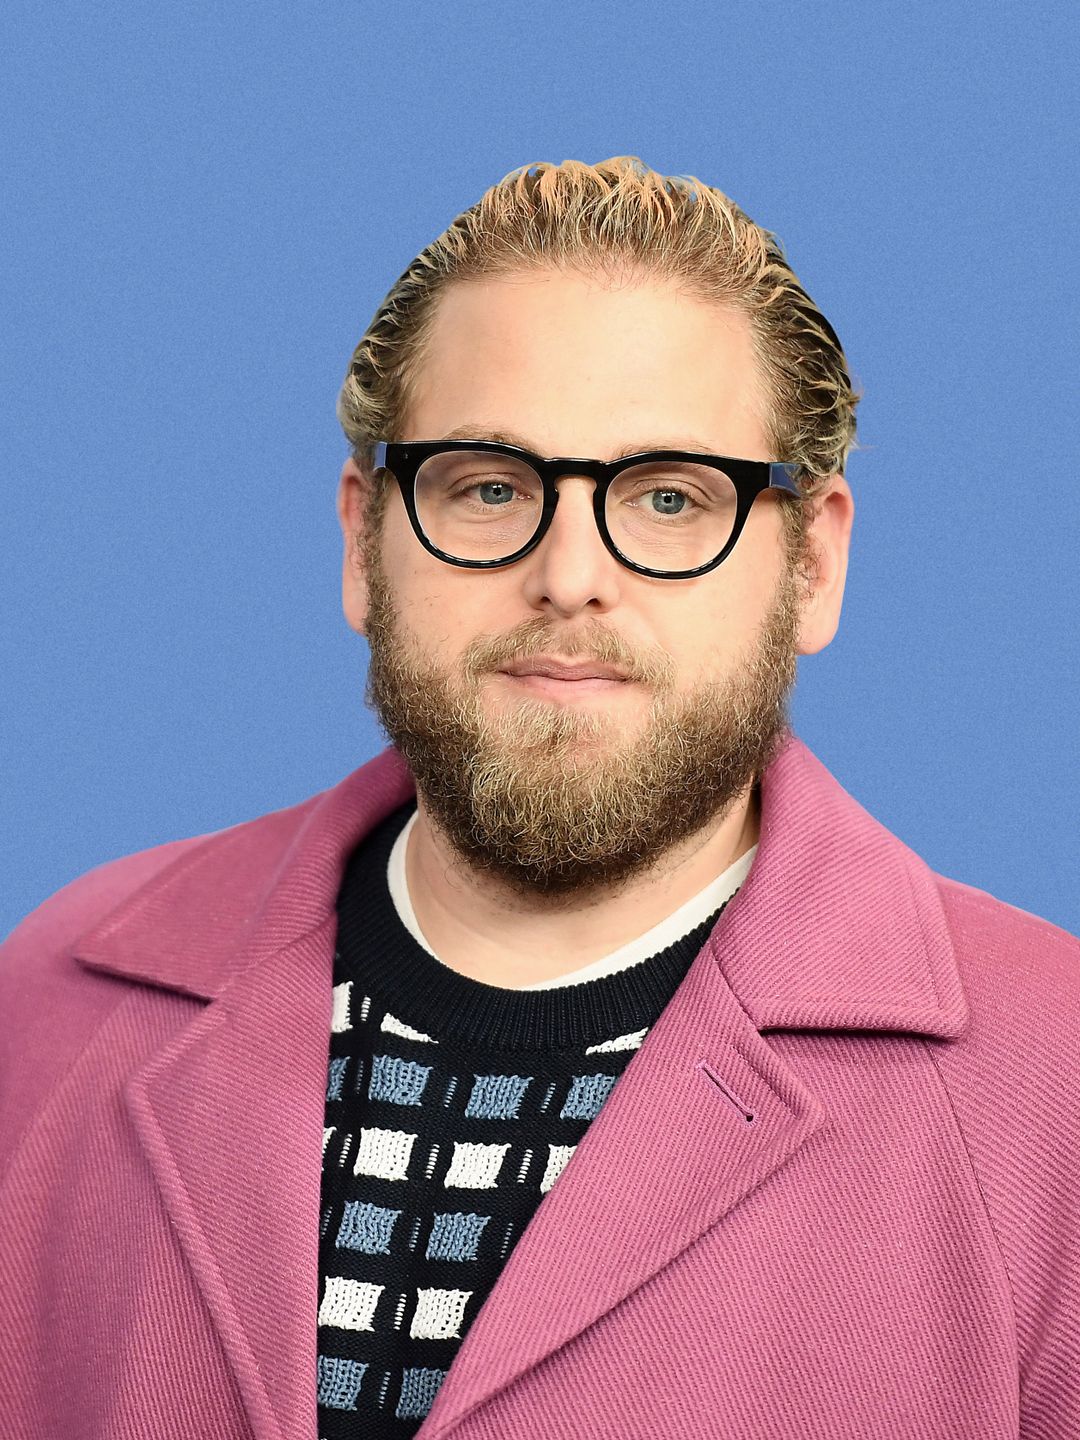 Jonah Hill who is his father